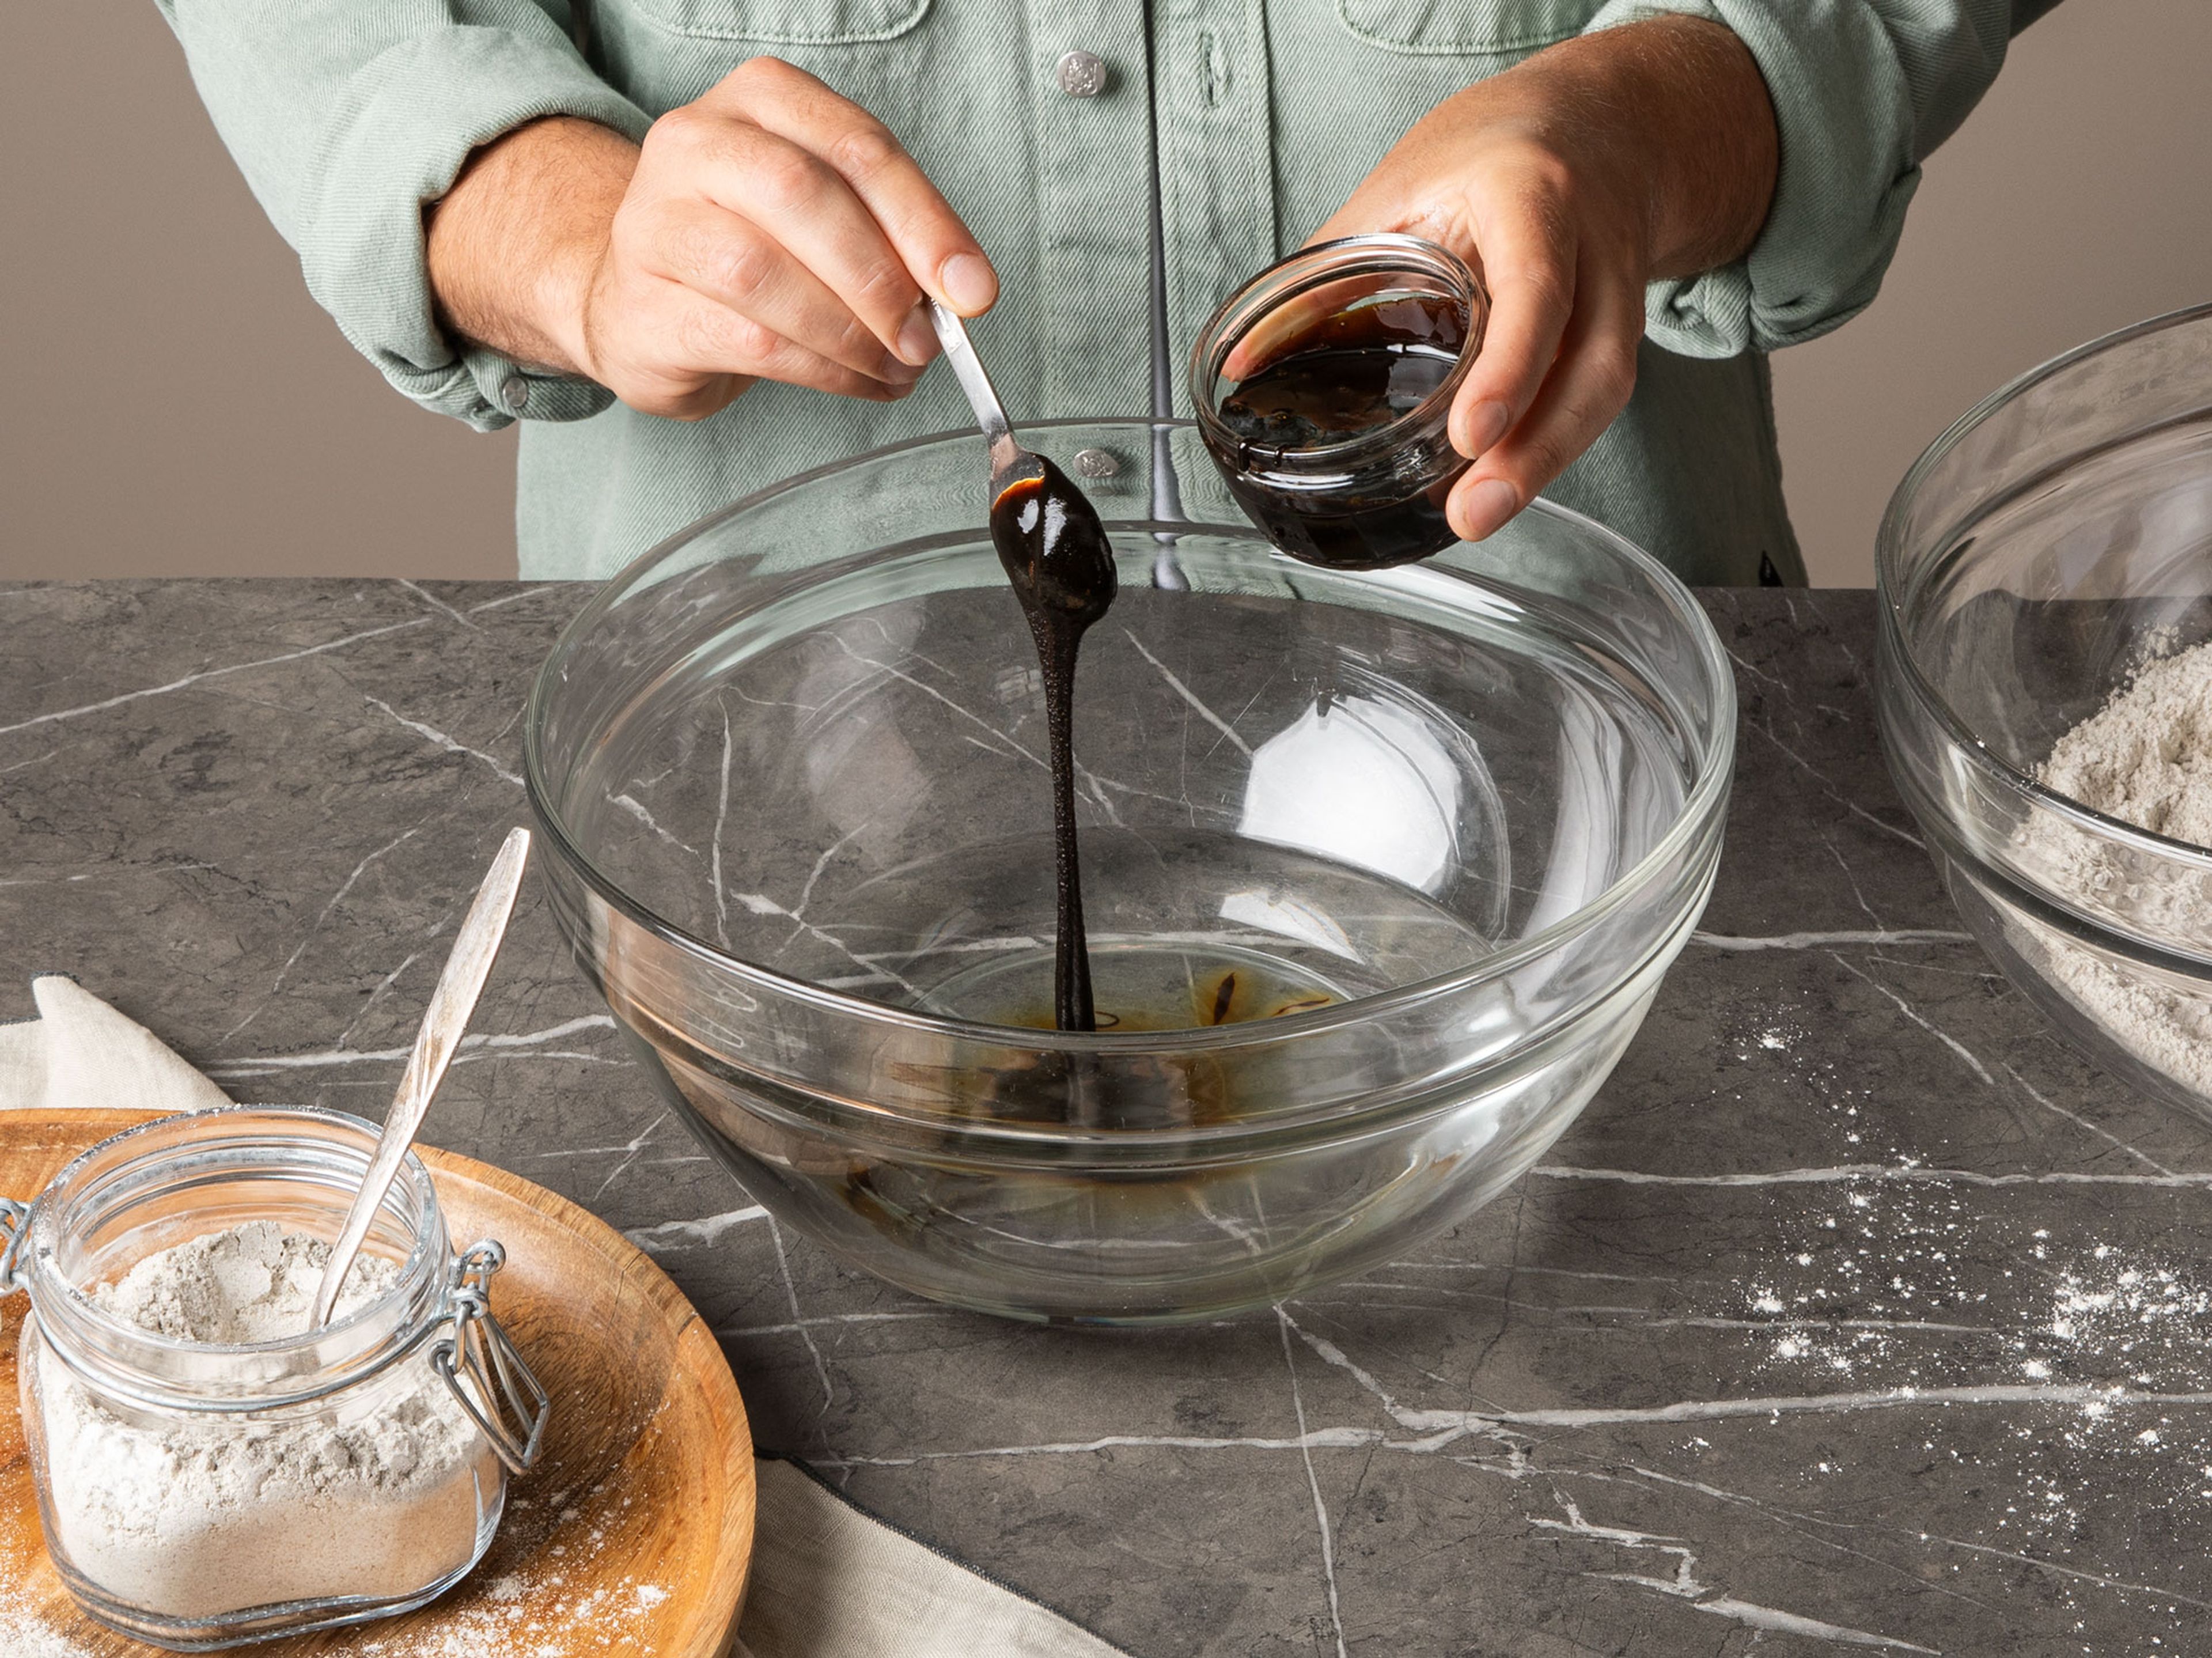 In a bowl, mix the flour with salt. In a separate, large bowl, whisk the molasses into the water until fully dissolved.